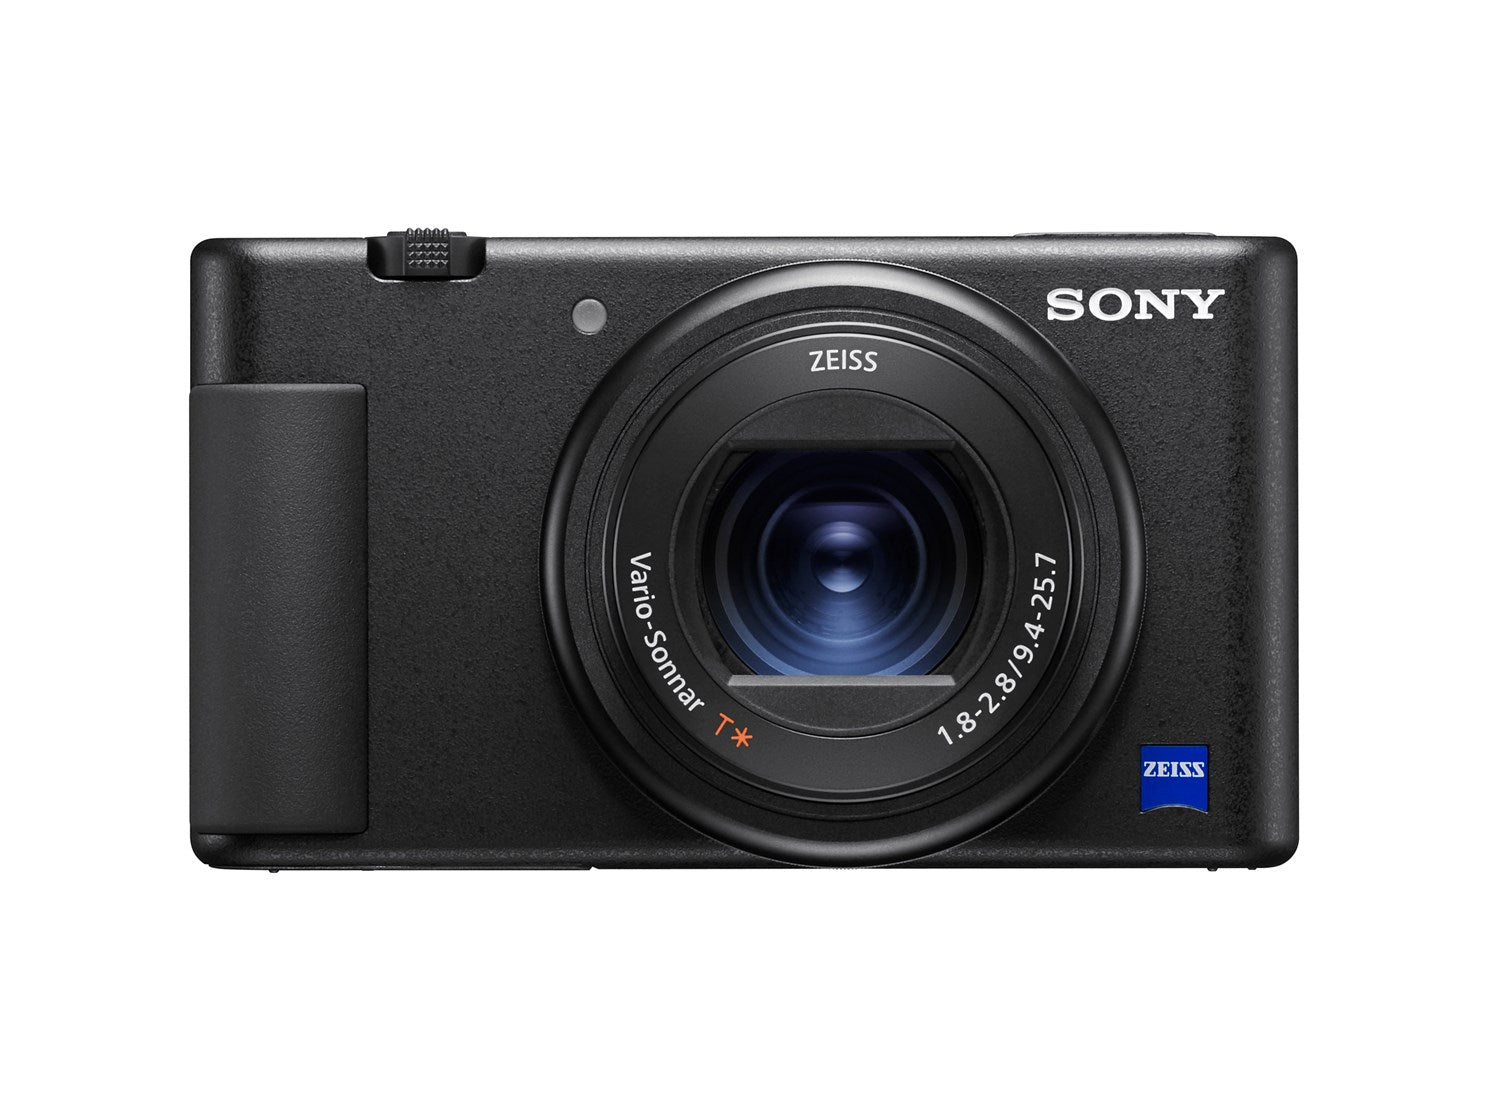 Sony ZV-1 Compact Digital Camera 4K UHD - Black - Perfect for Vloggers - Product Photo 1 - Front shot of the camera with the lens details visible